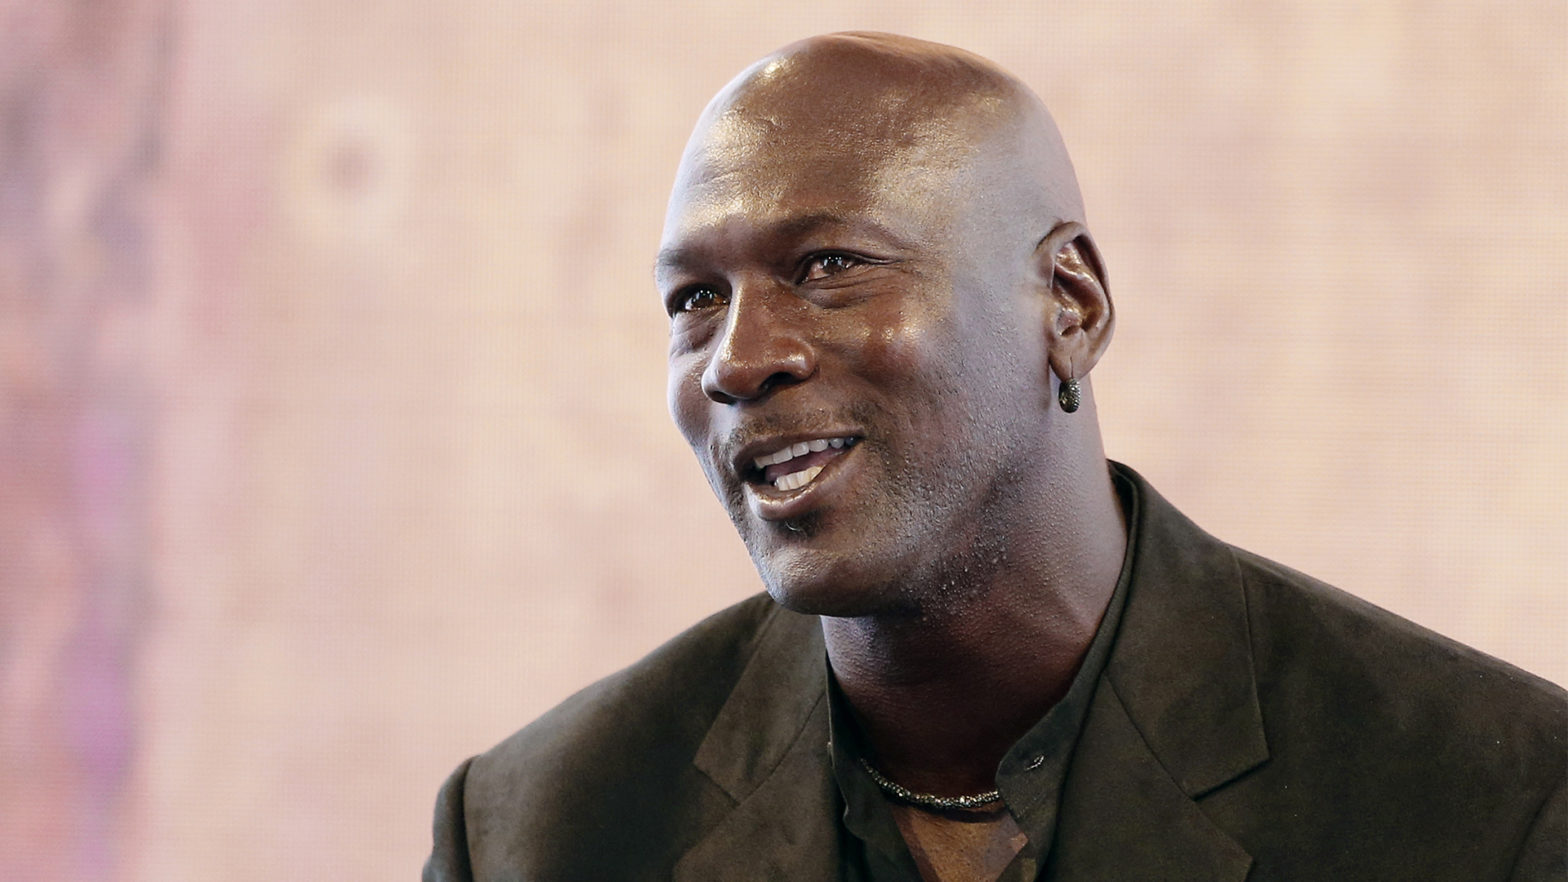 1986 Rare Michael Jordan Fleer Rookie Card Valued At $3M Gears Up For Auction